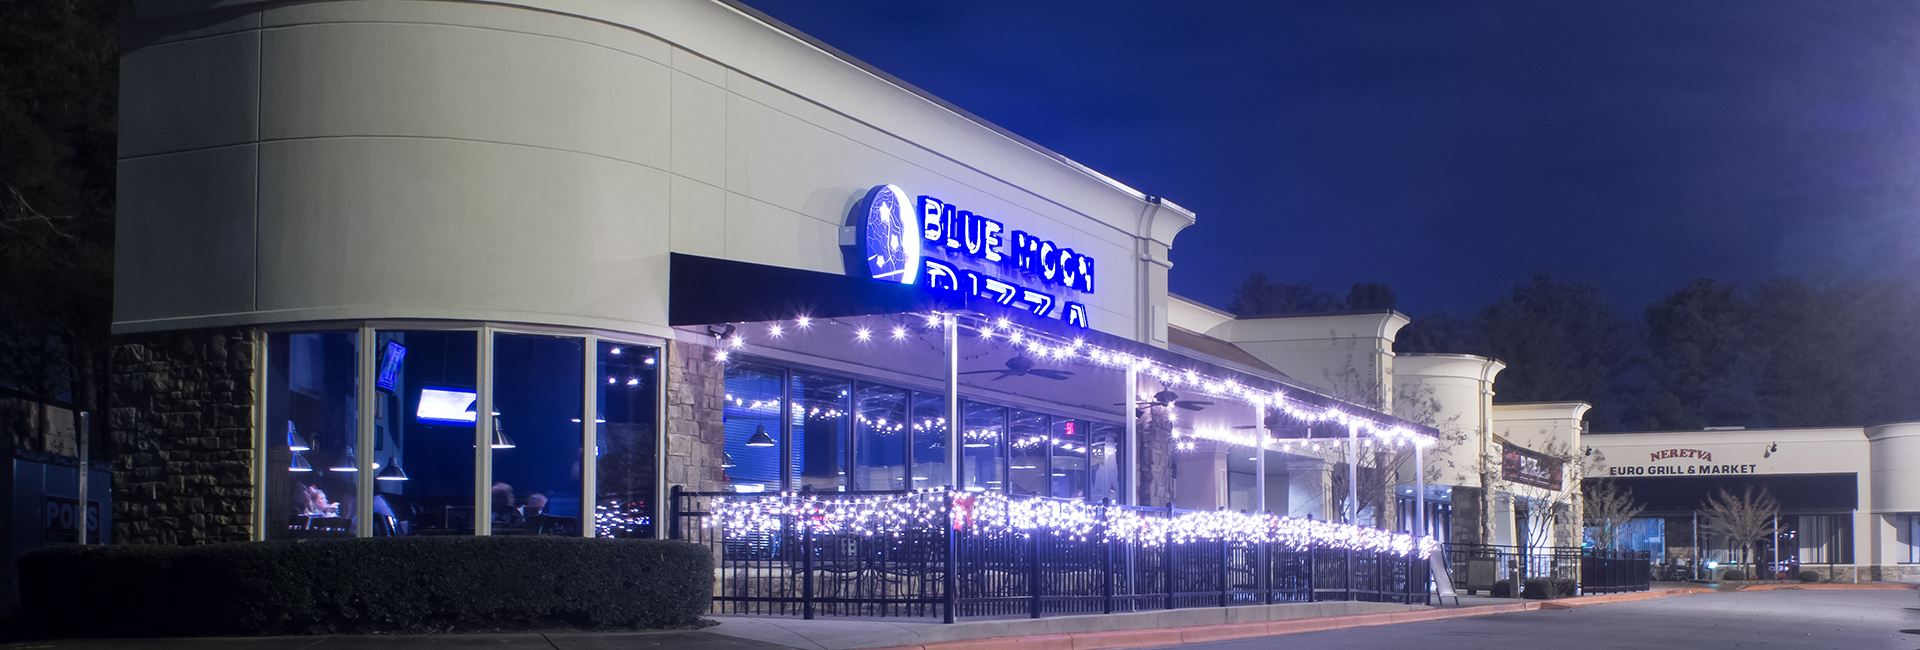 About Blue Moon Pizza